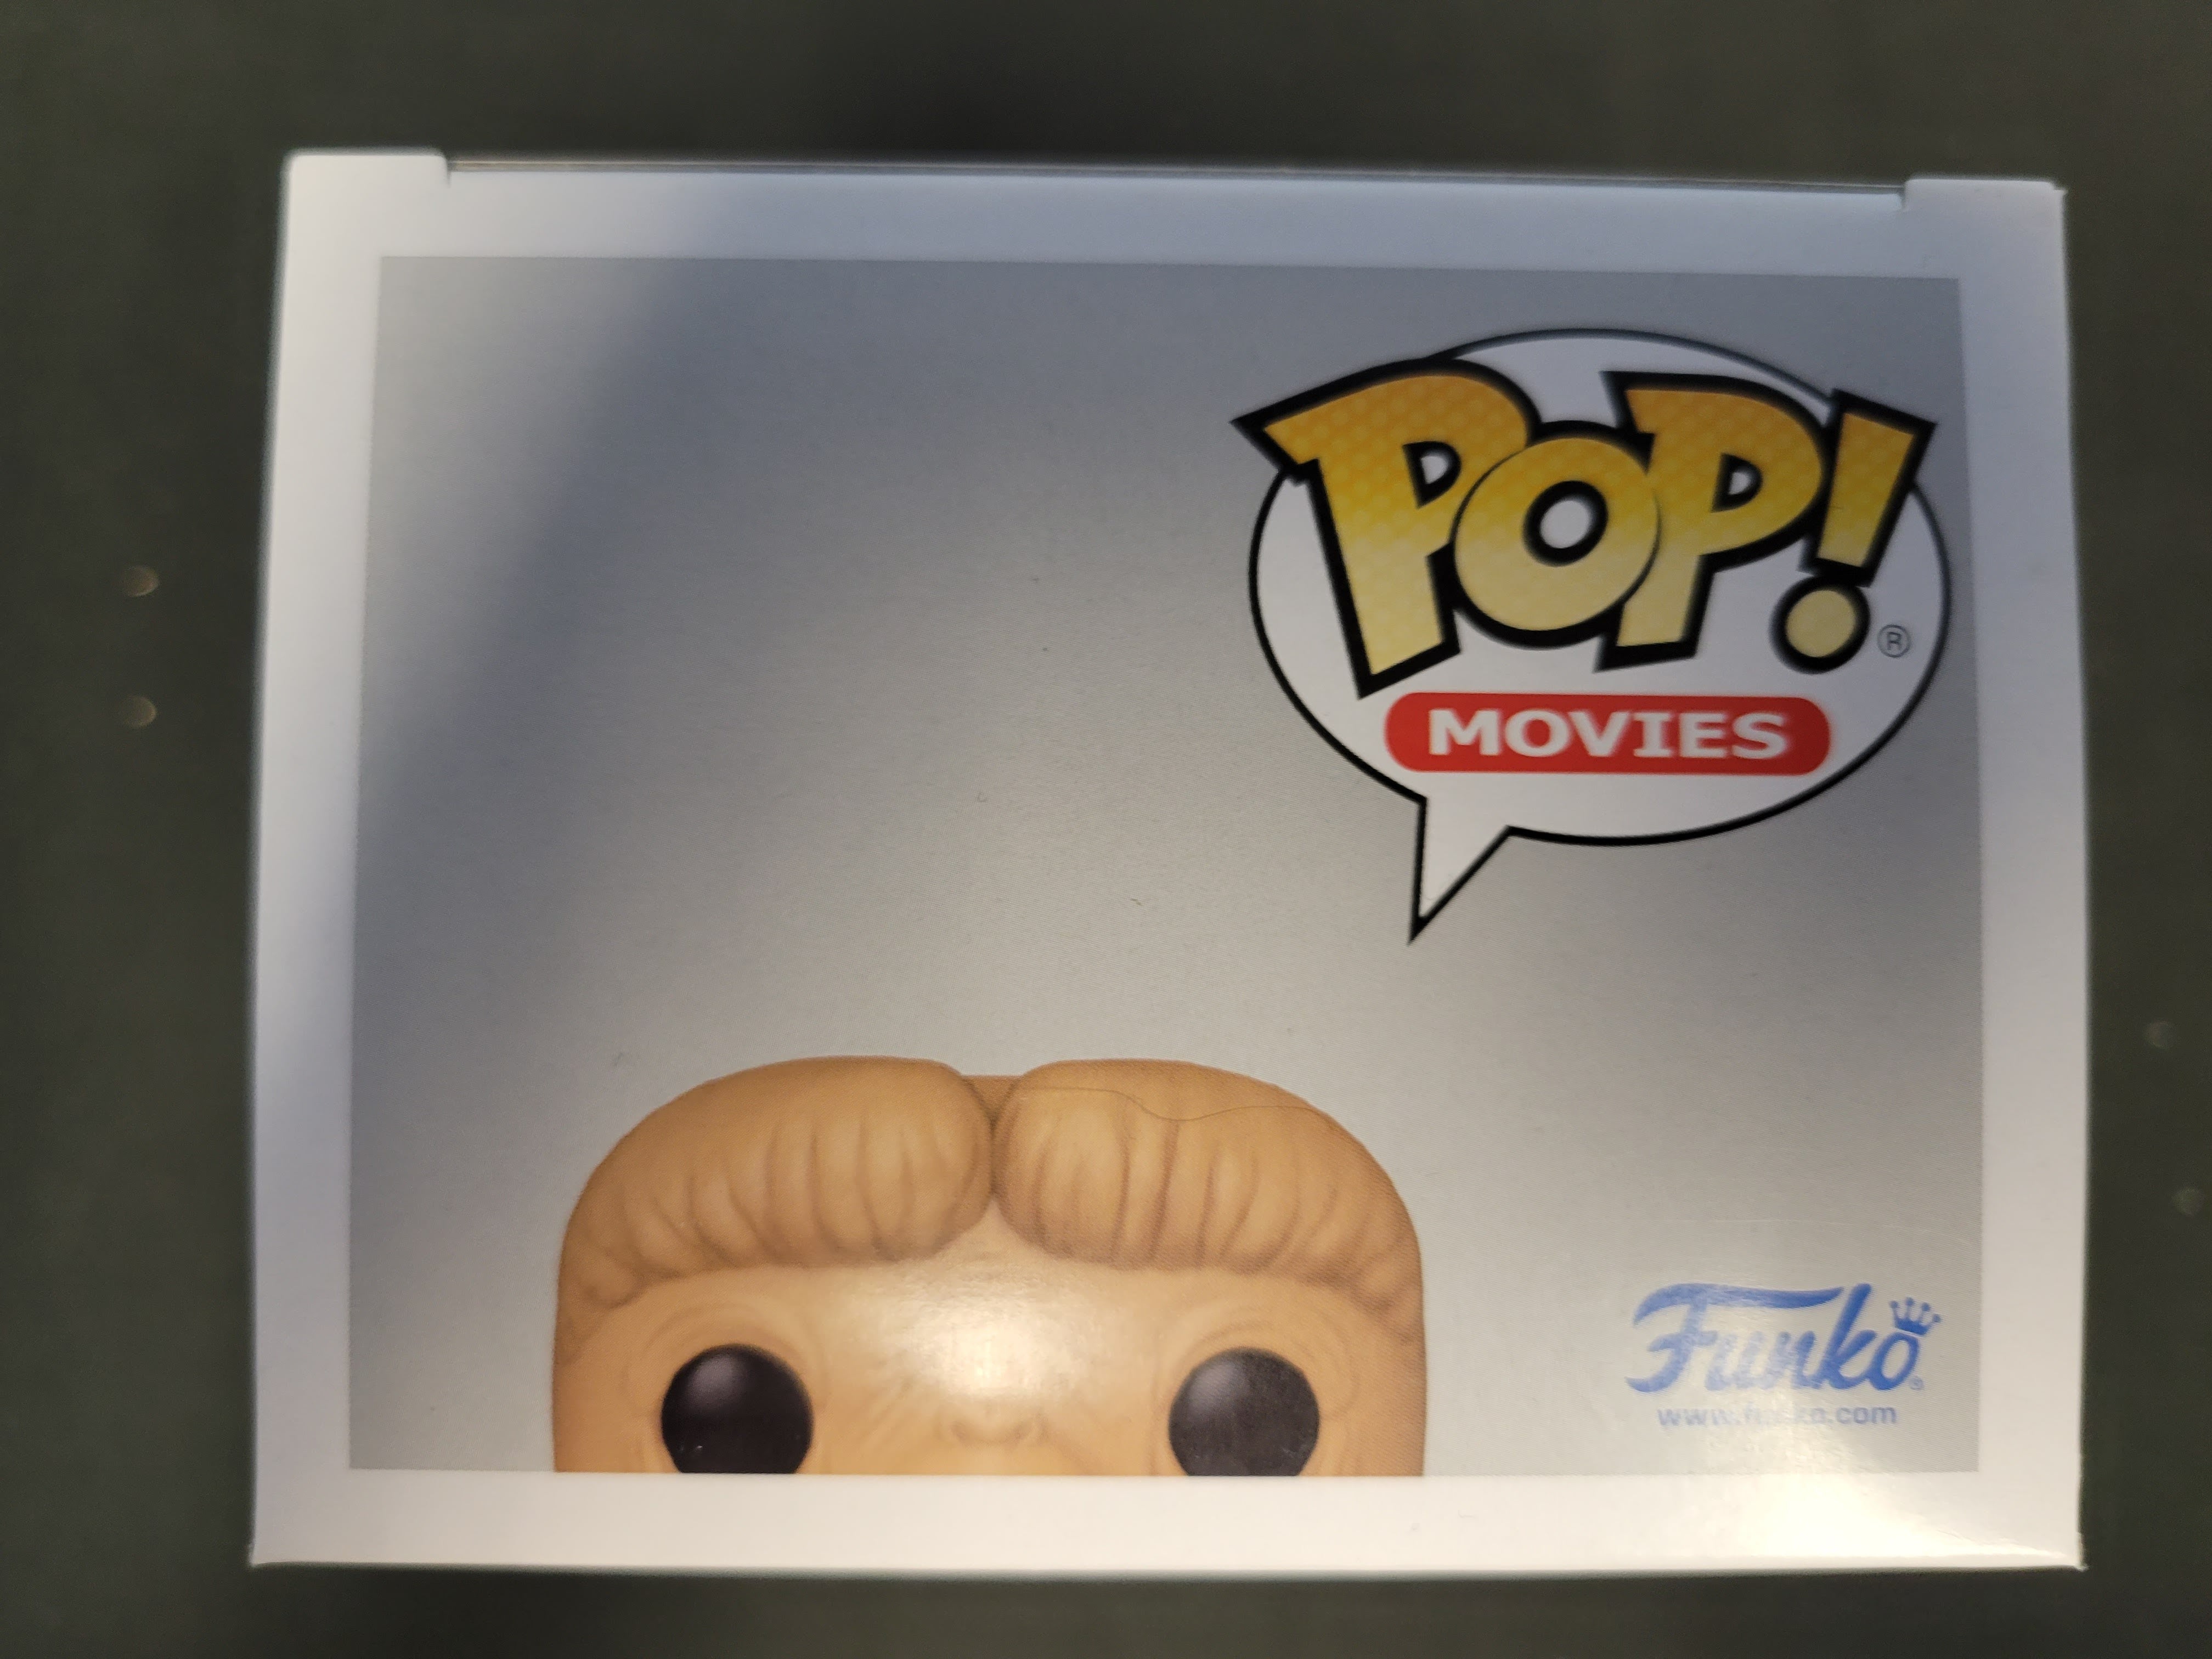 Funko Pop: E.T. The Extra-Terrestrial: E.T. With Candy #1266 Autographed by Matthew DeMeritt